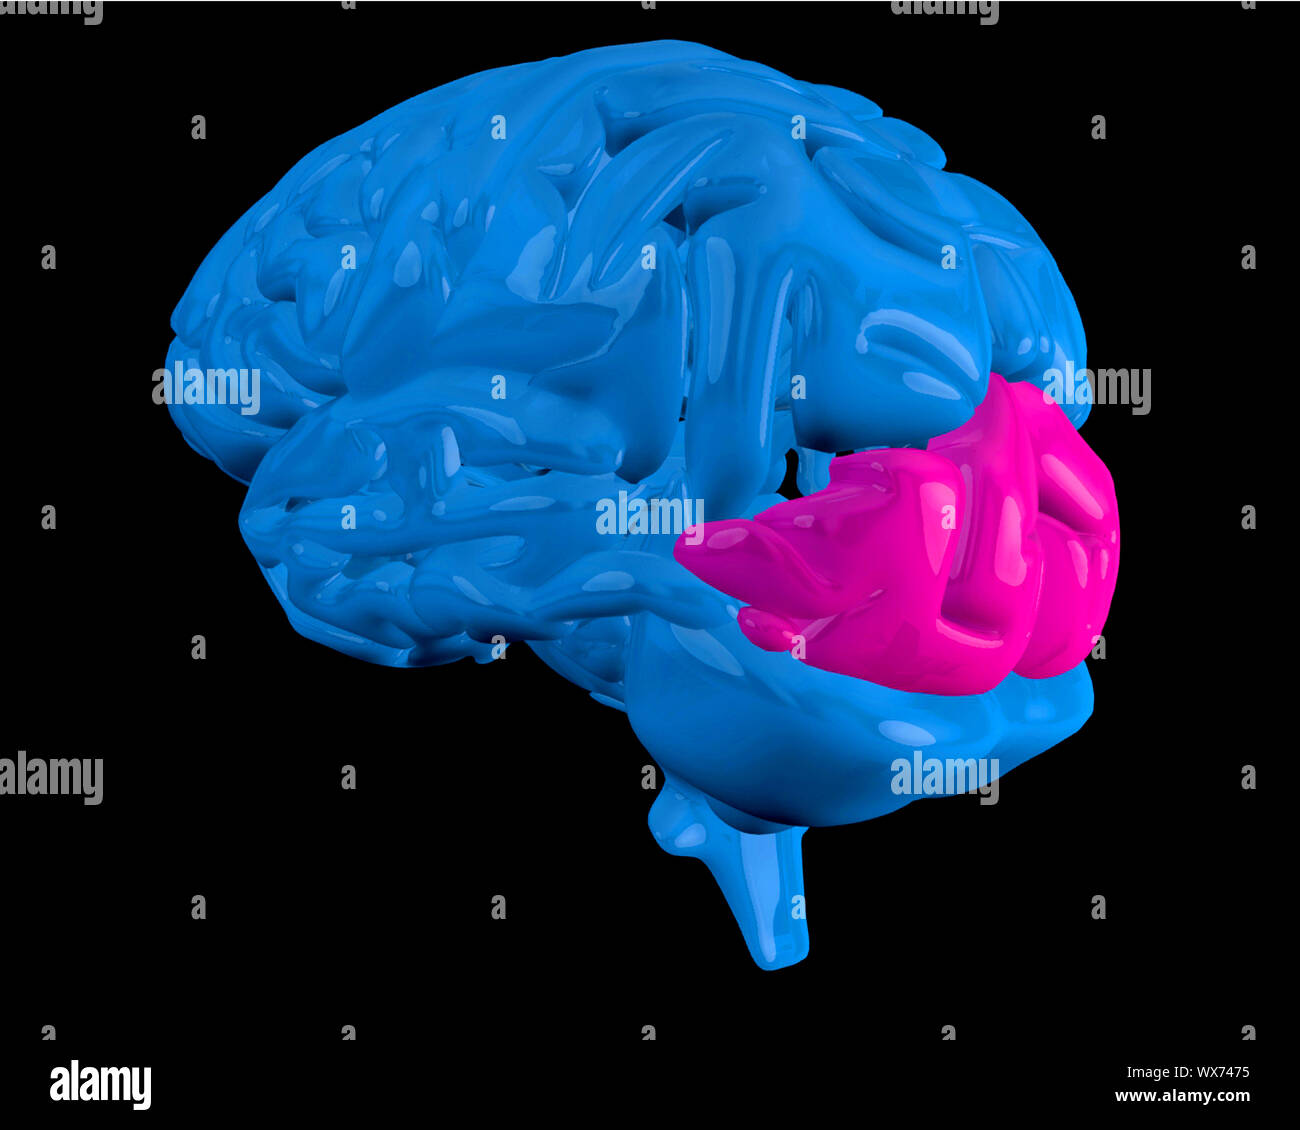 Blue brain with highlighted pink ocipital lobe on black background Stock Photo